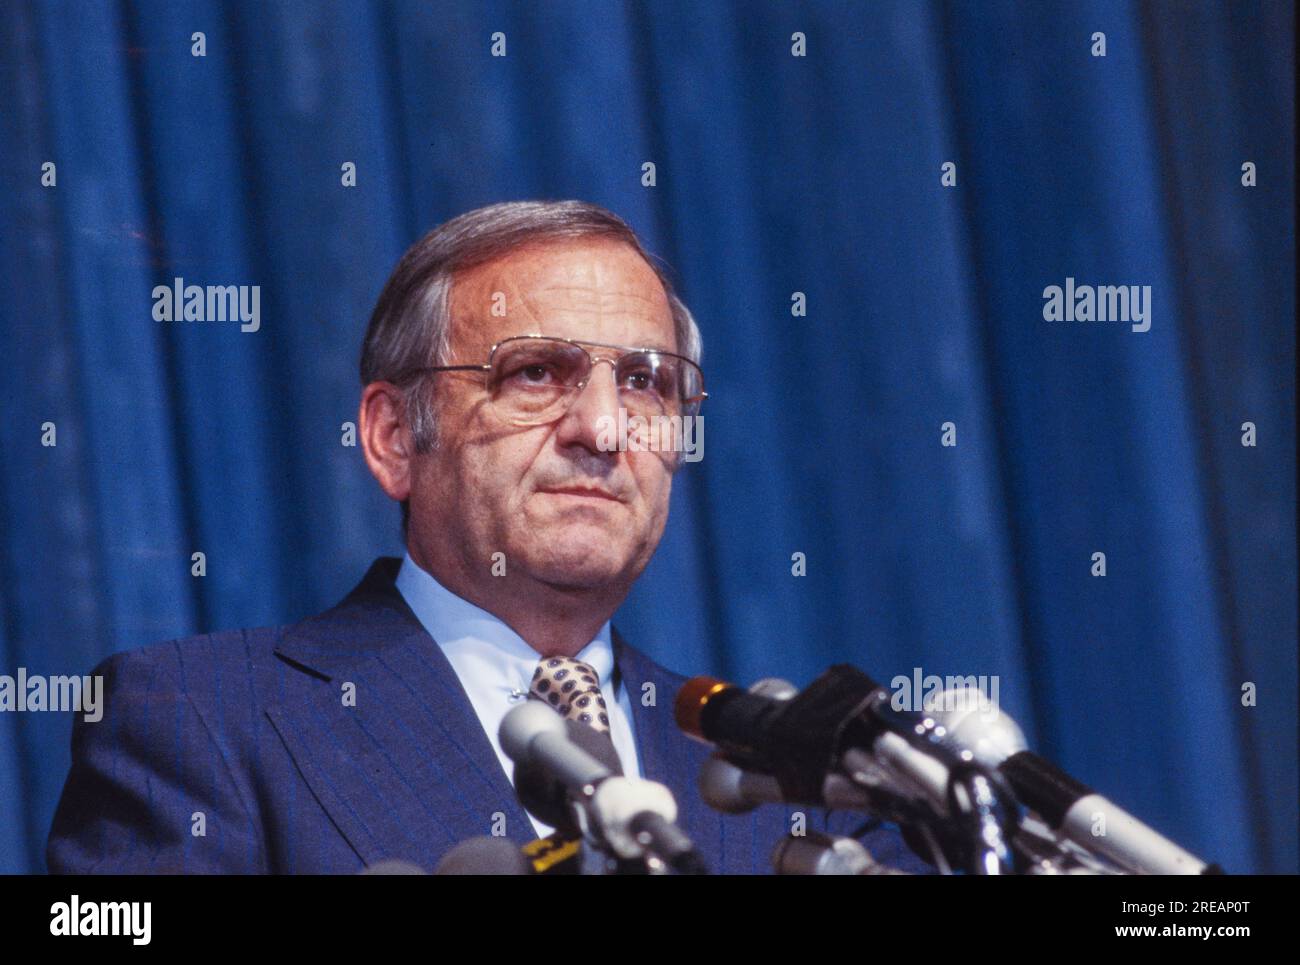 Lido Anthony ' Lee ' Iacocca October 15, 1924 – July 2, 2019) was an American automobile executive best known for the development of the Ford Mustang, Continental Mark III, and Ford Pinto cars while at the Ford Motor Company in the 1960s, and for reviving the Chrysler Corporation as its CEO during the 1980s. He was president and CEO of Chrysler from 1978 and chairman from 1979, until his retirement at the end of 1992. He was one of the few executives to preside over the operations of two of the United States' Big Three automakers. Photograph by Bernard Gotfryd Stock Photo